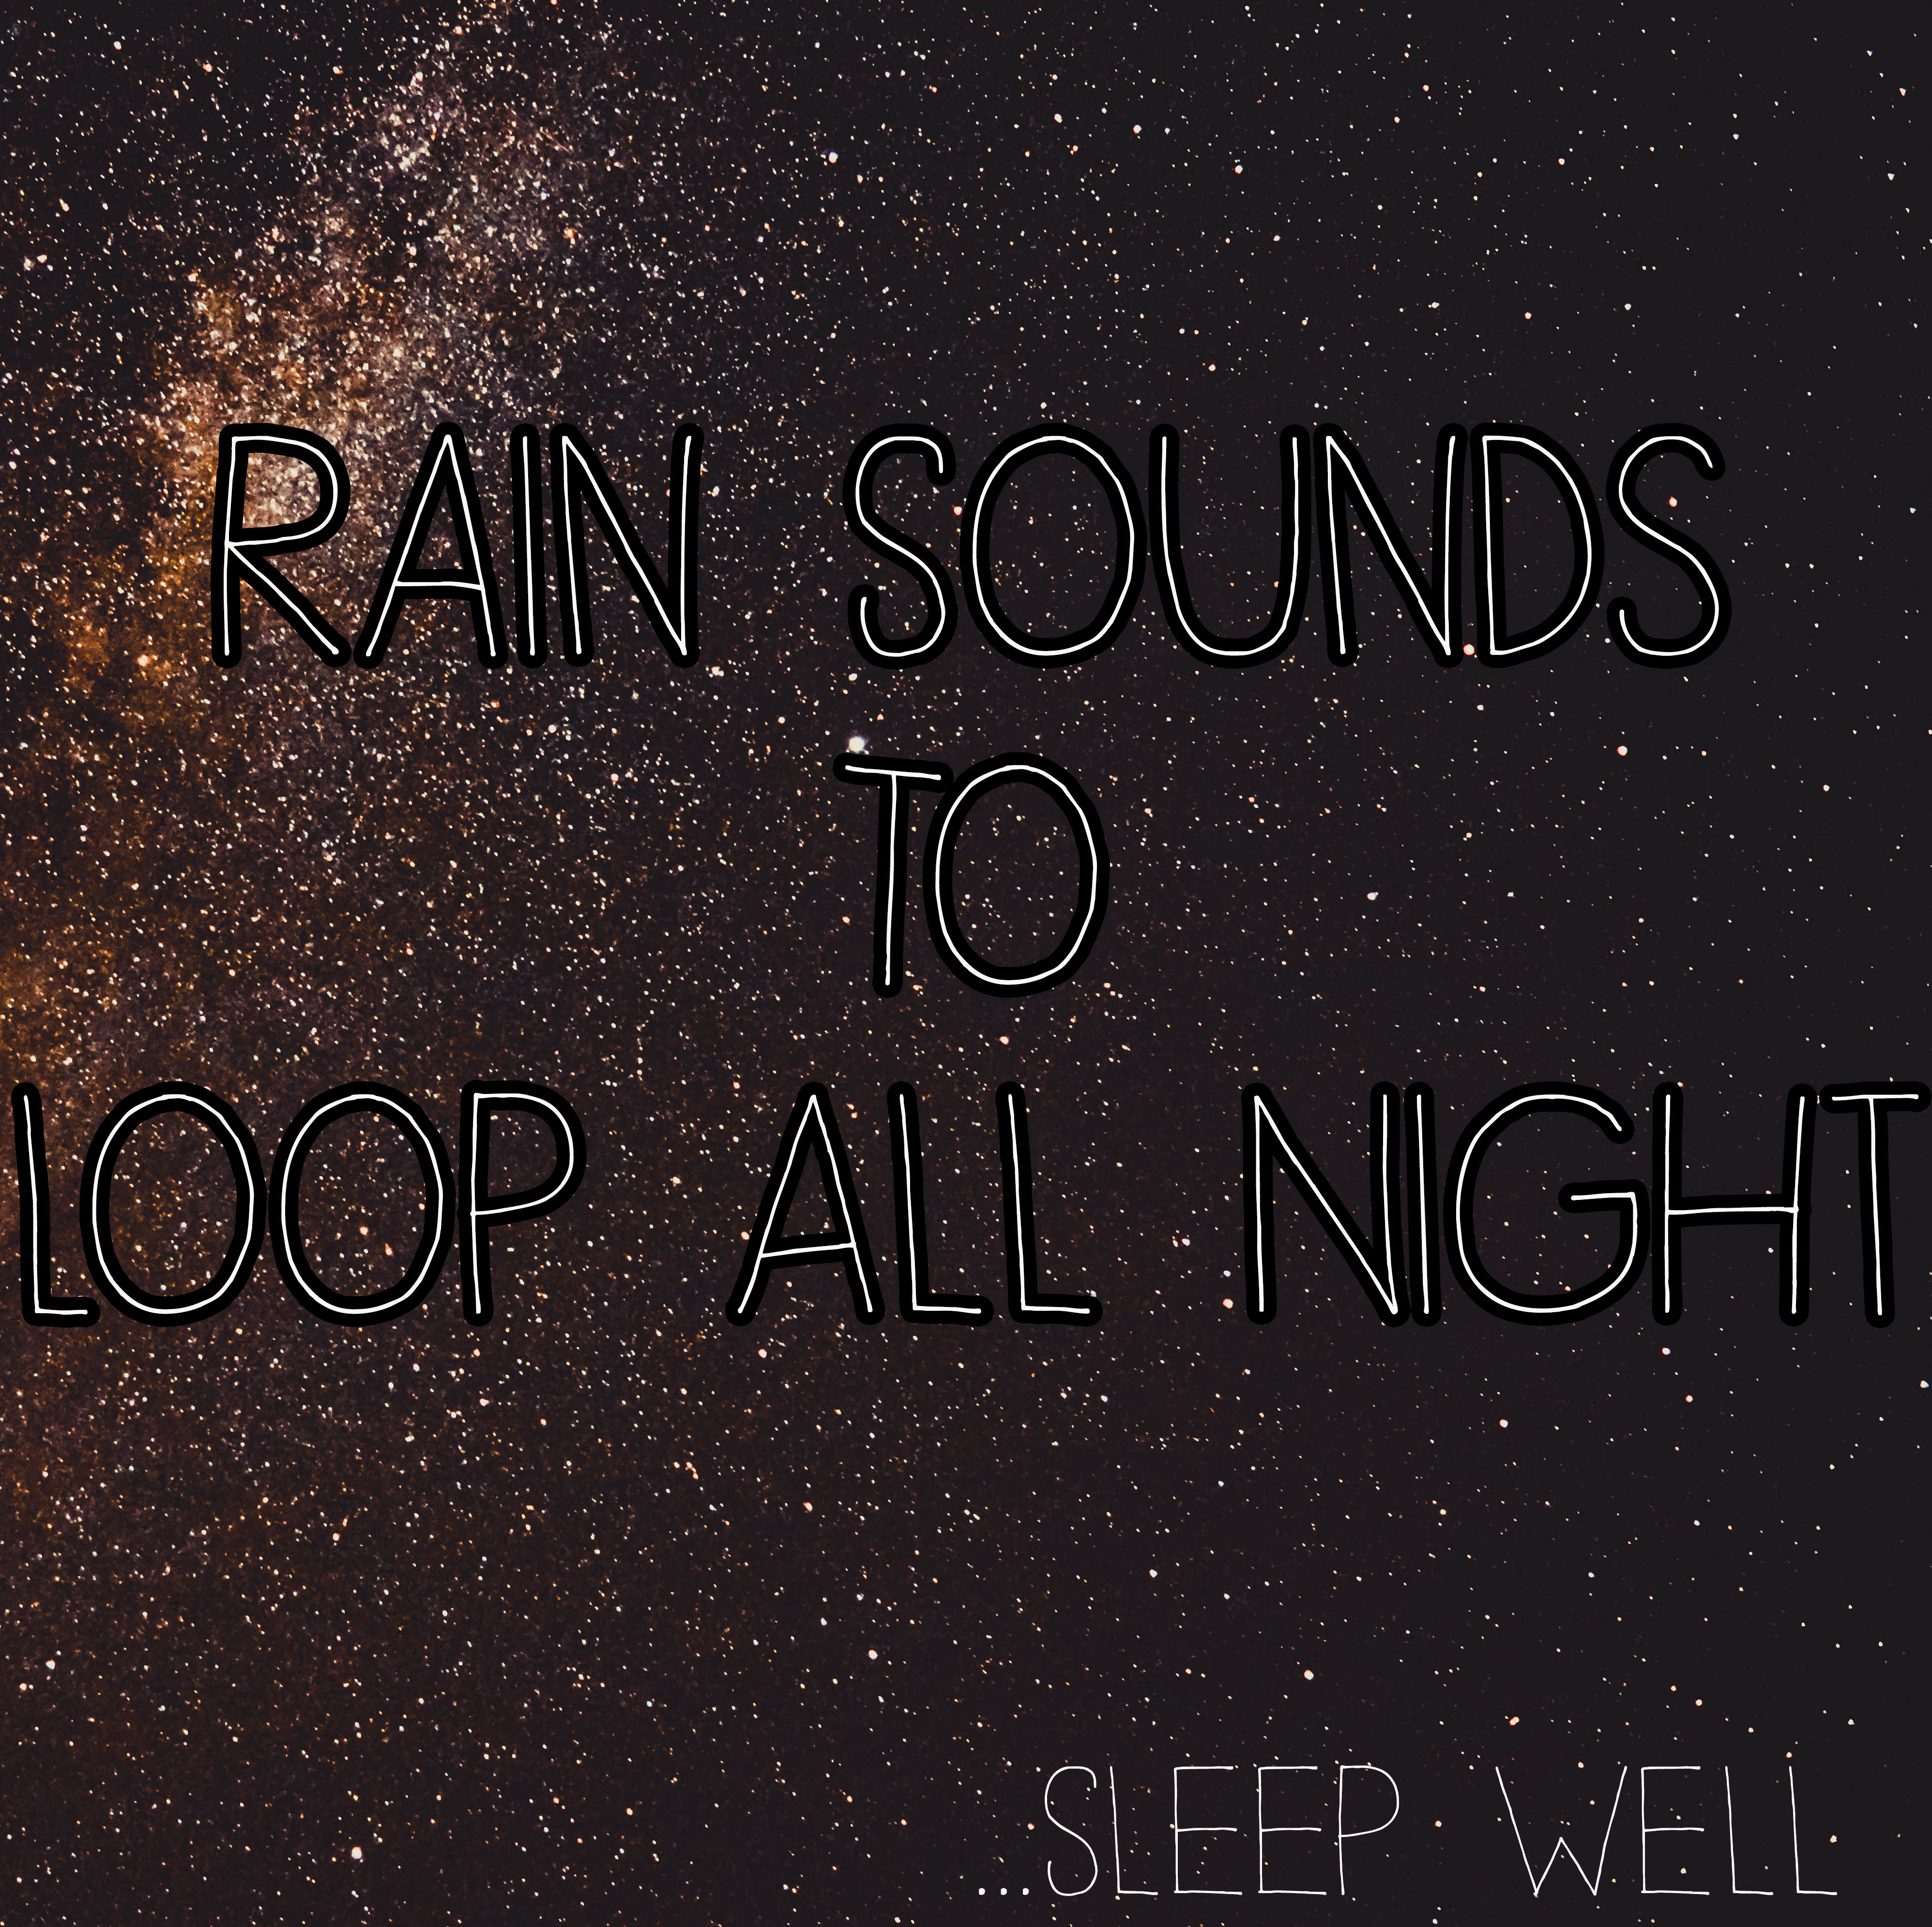 Amazing Rain Sounds Compilation - Best Rain Sounds for Looping